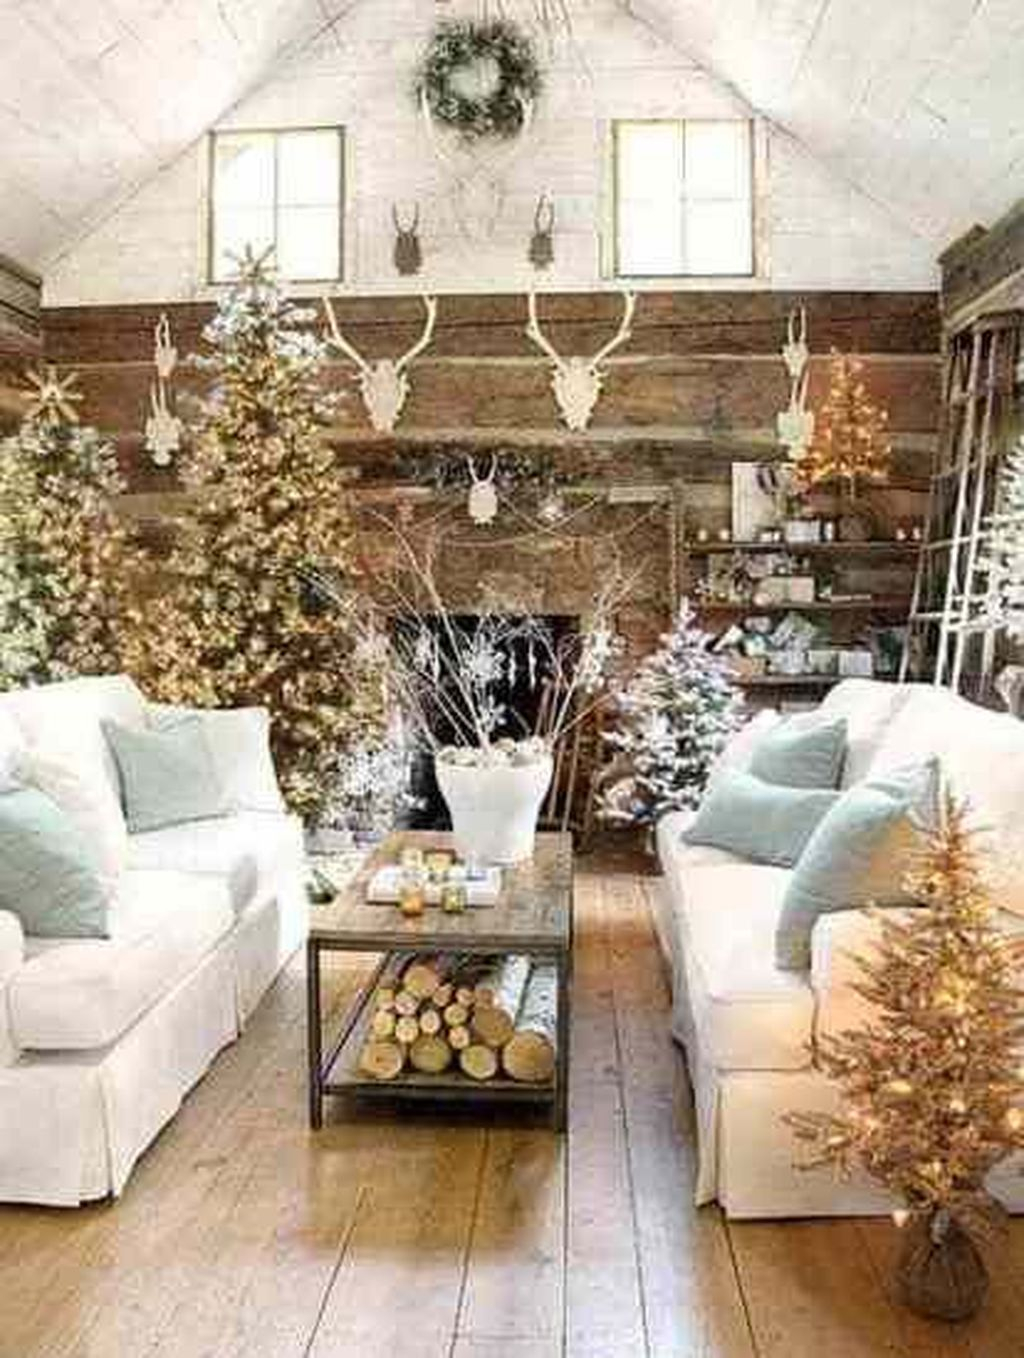 Fabulous Interior Design Ideas For Fall And Winter To Try Now23